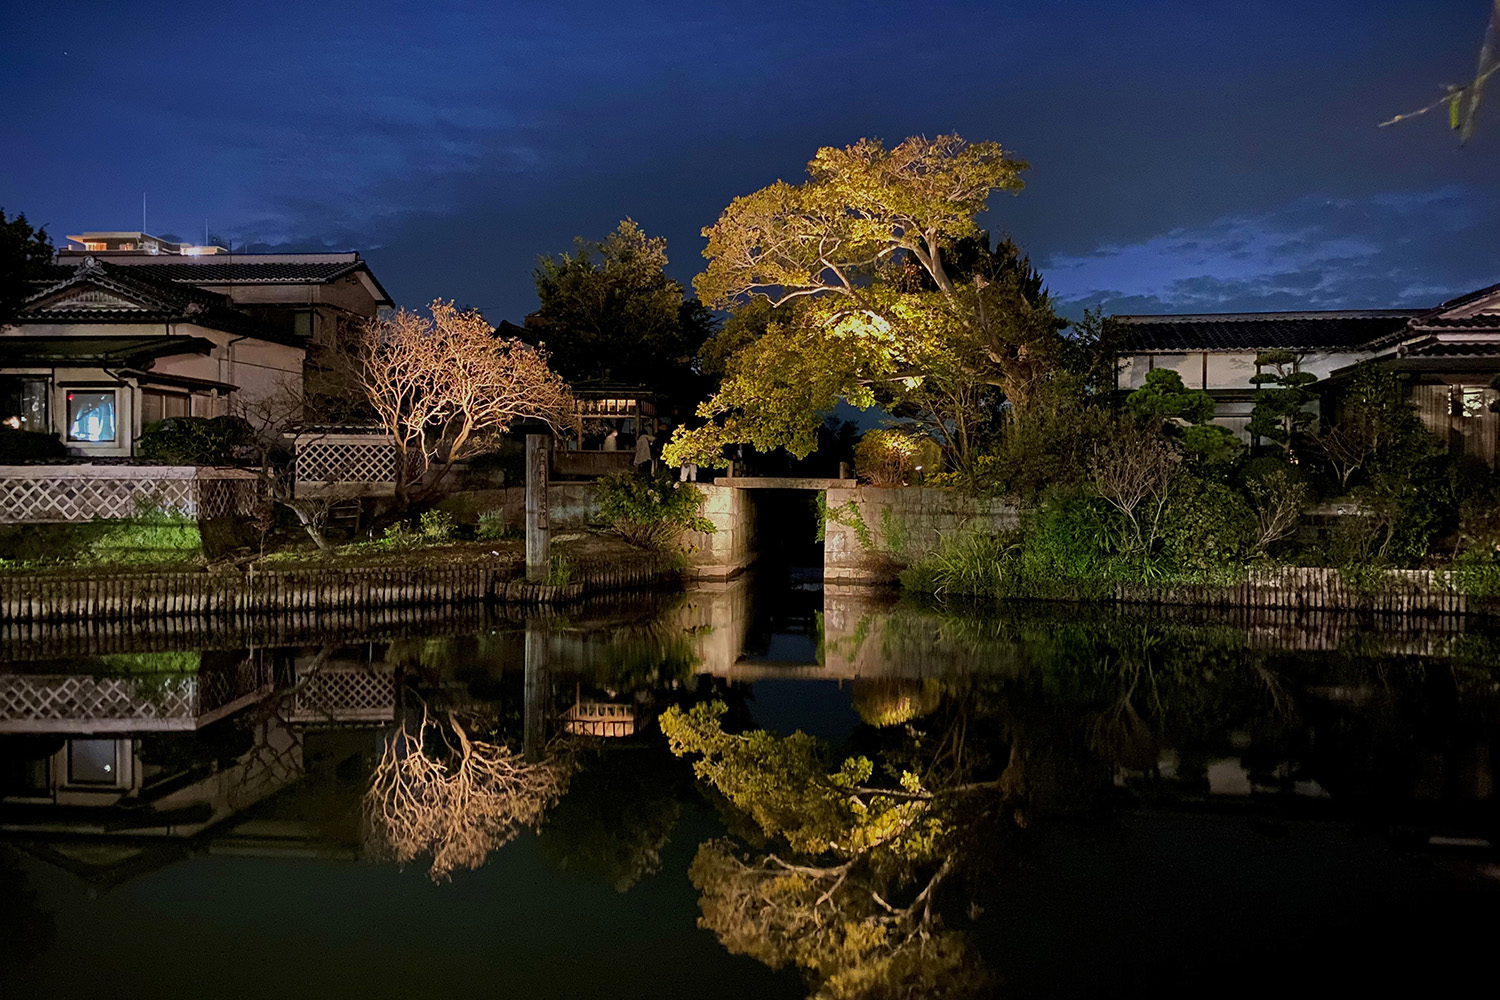 The nightscape along the boating course in Yanagawa was completed